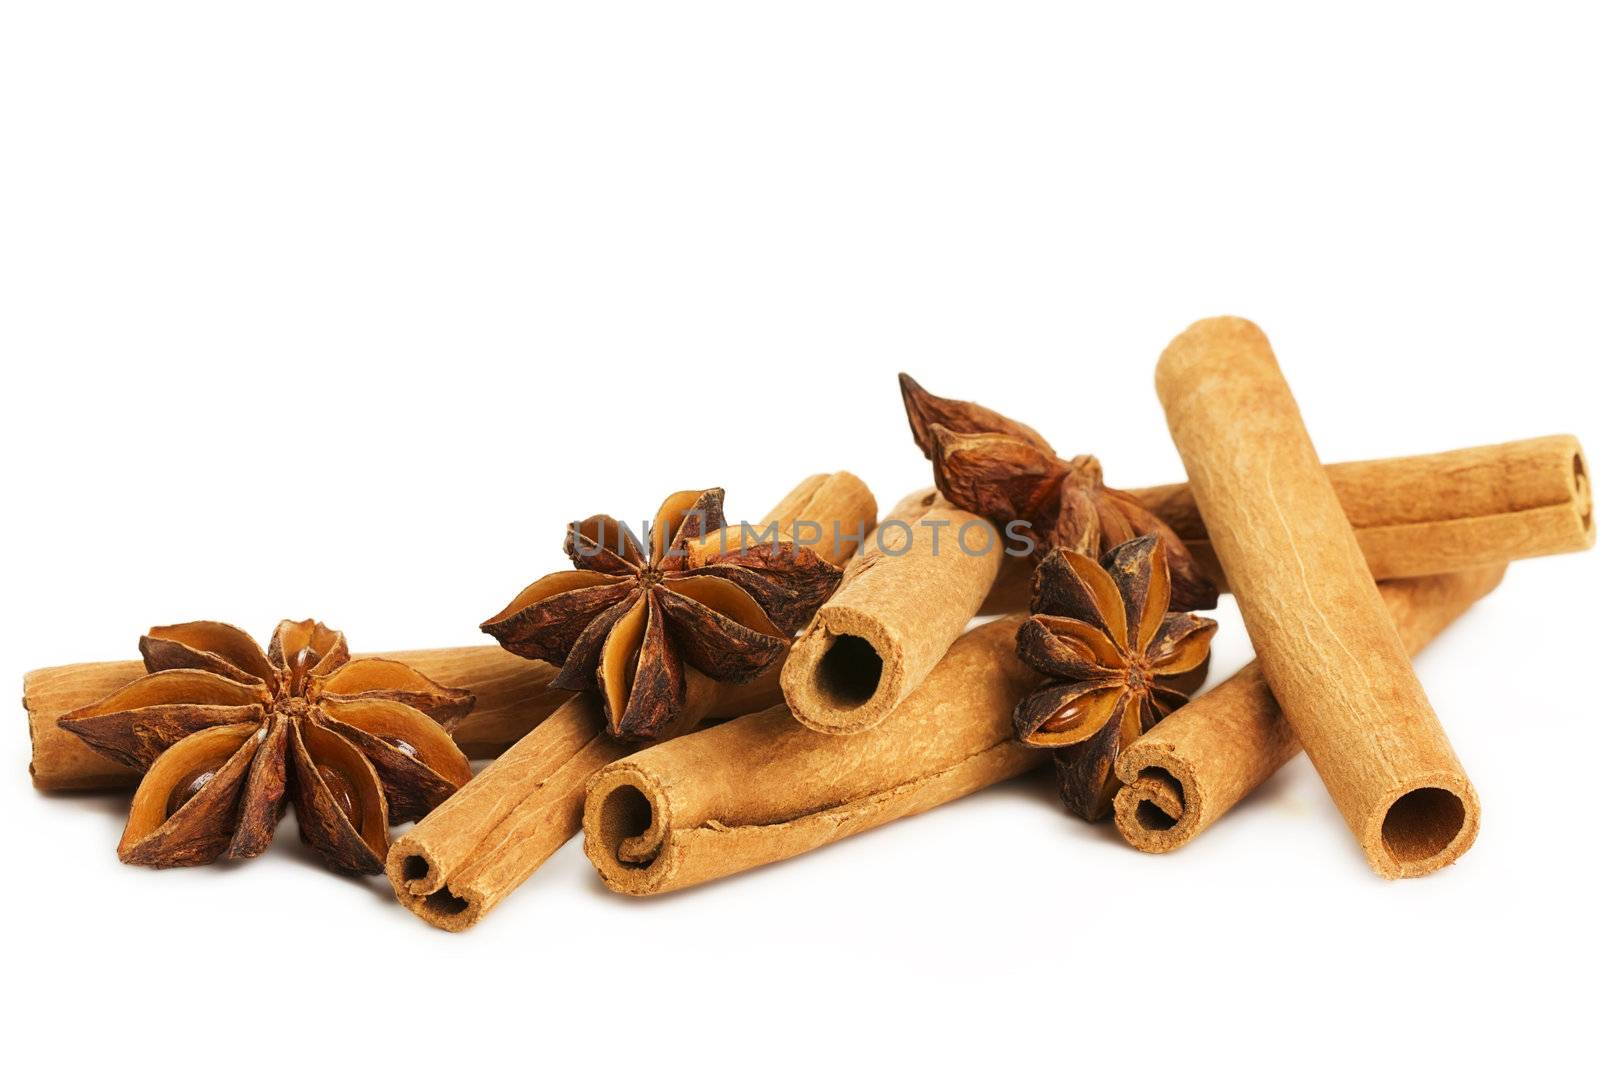 some cinnamon sticks and star anise on white background